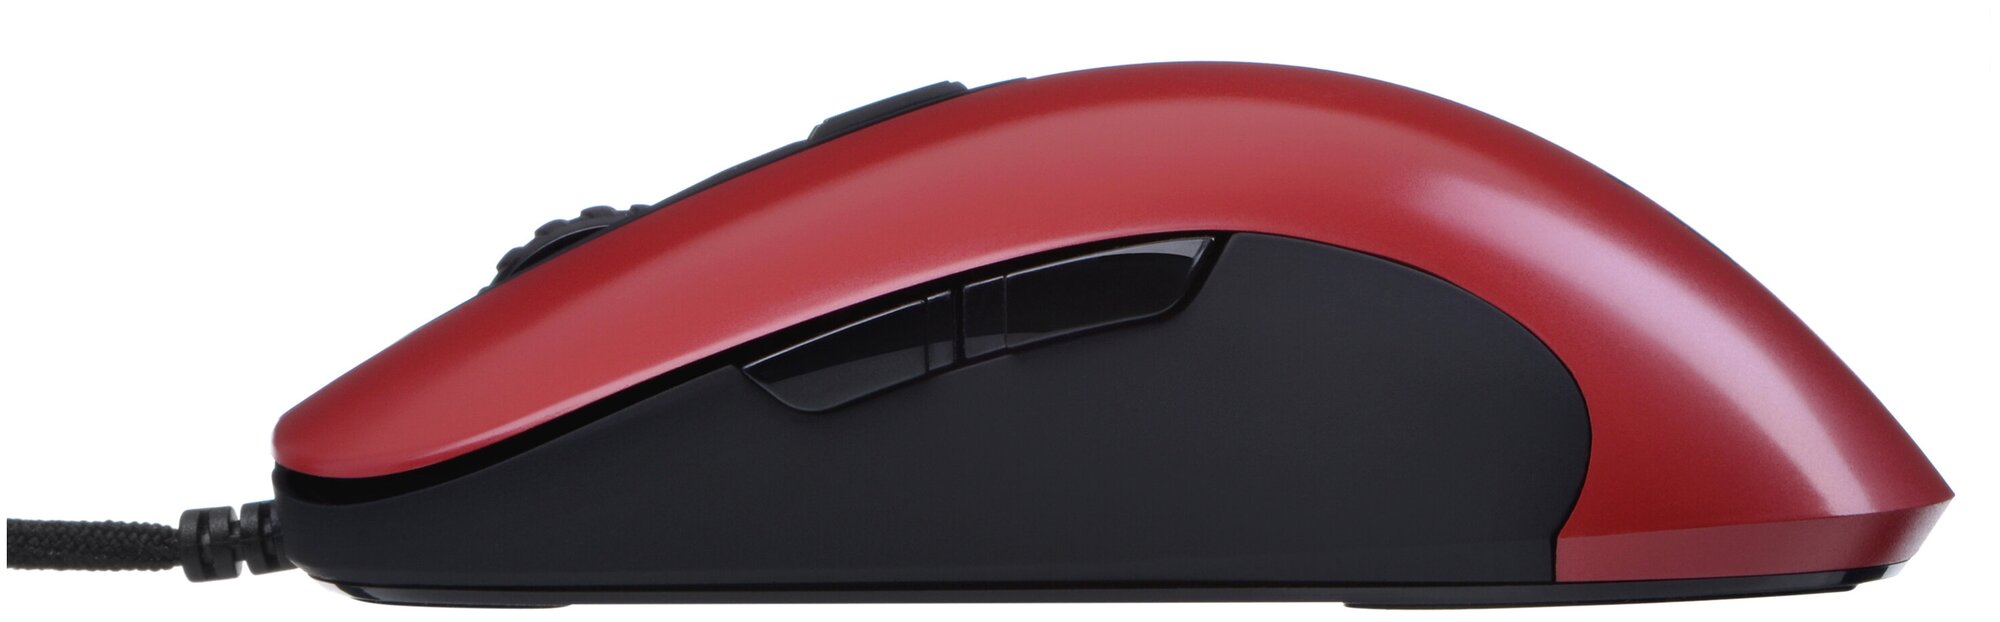 Dream Machines Mouse DM1 FPS Blood Red